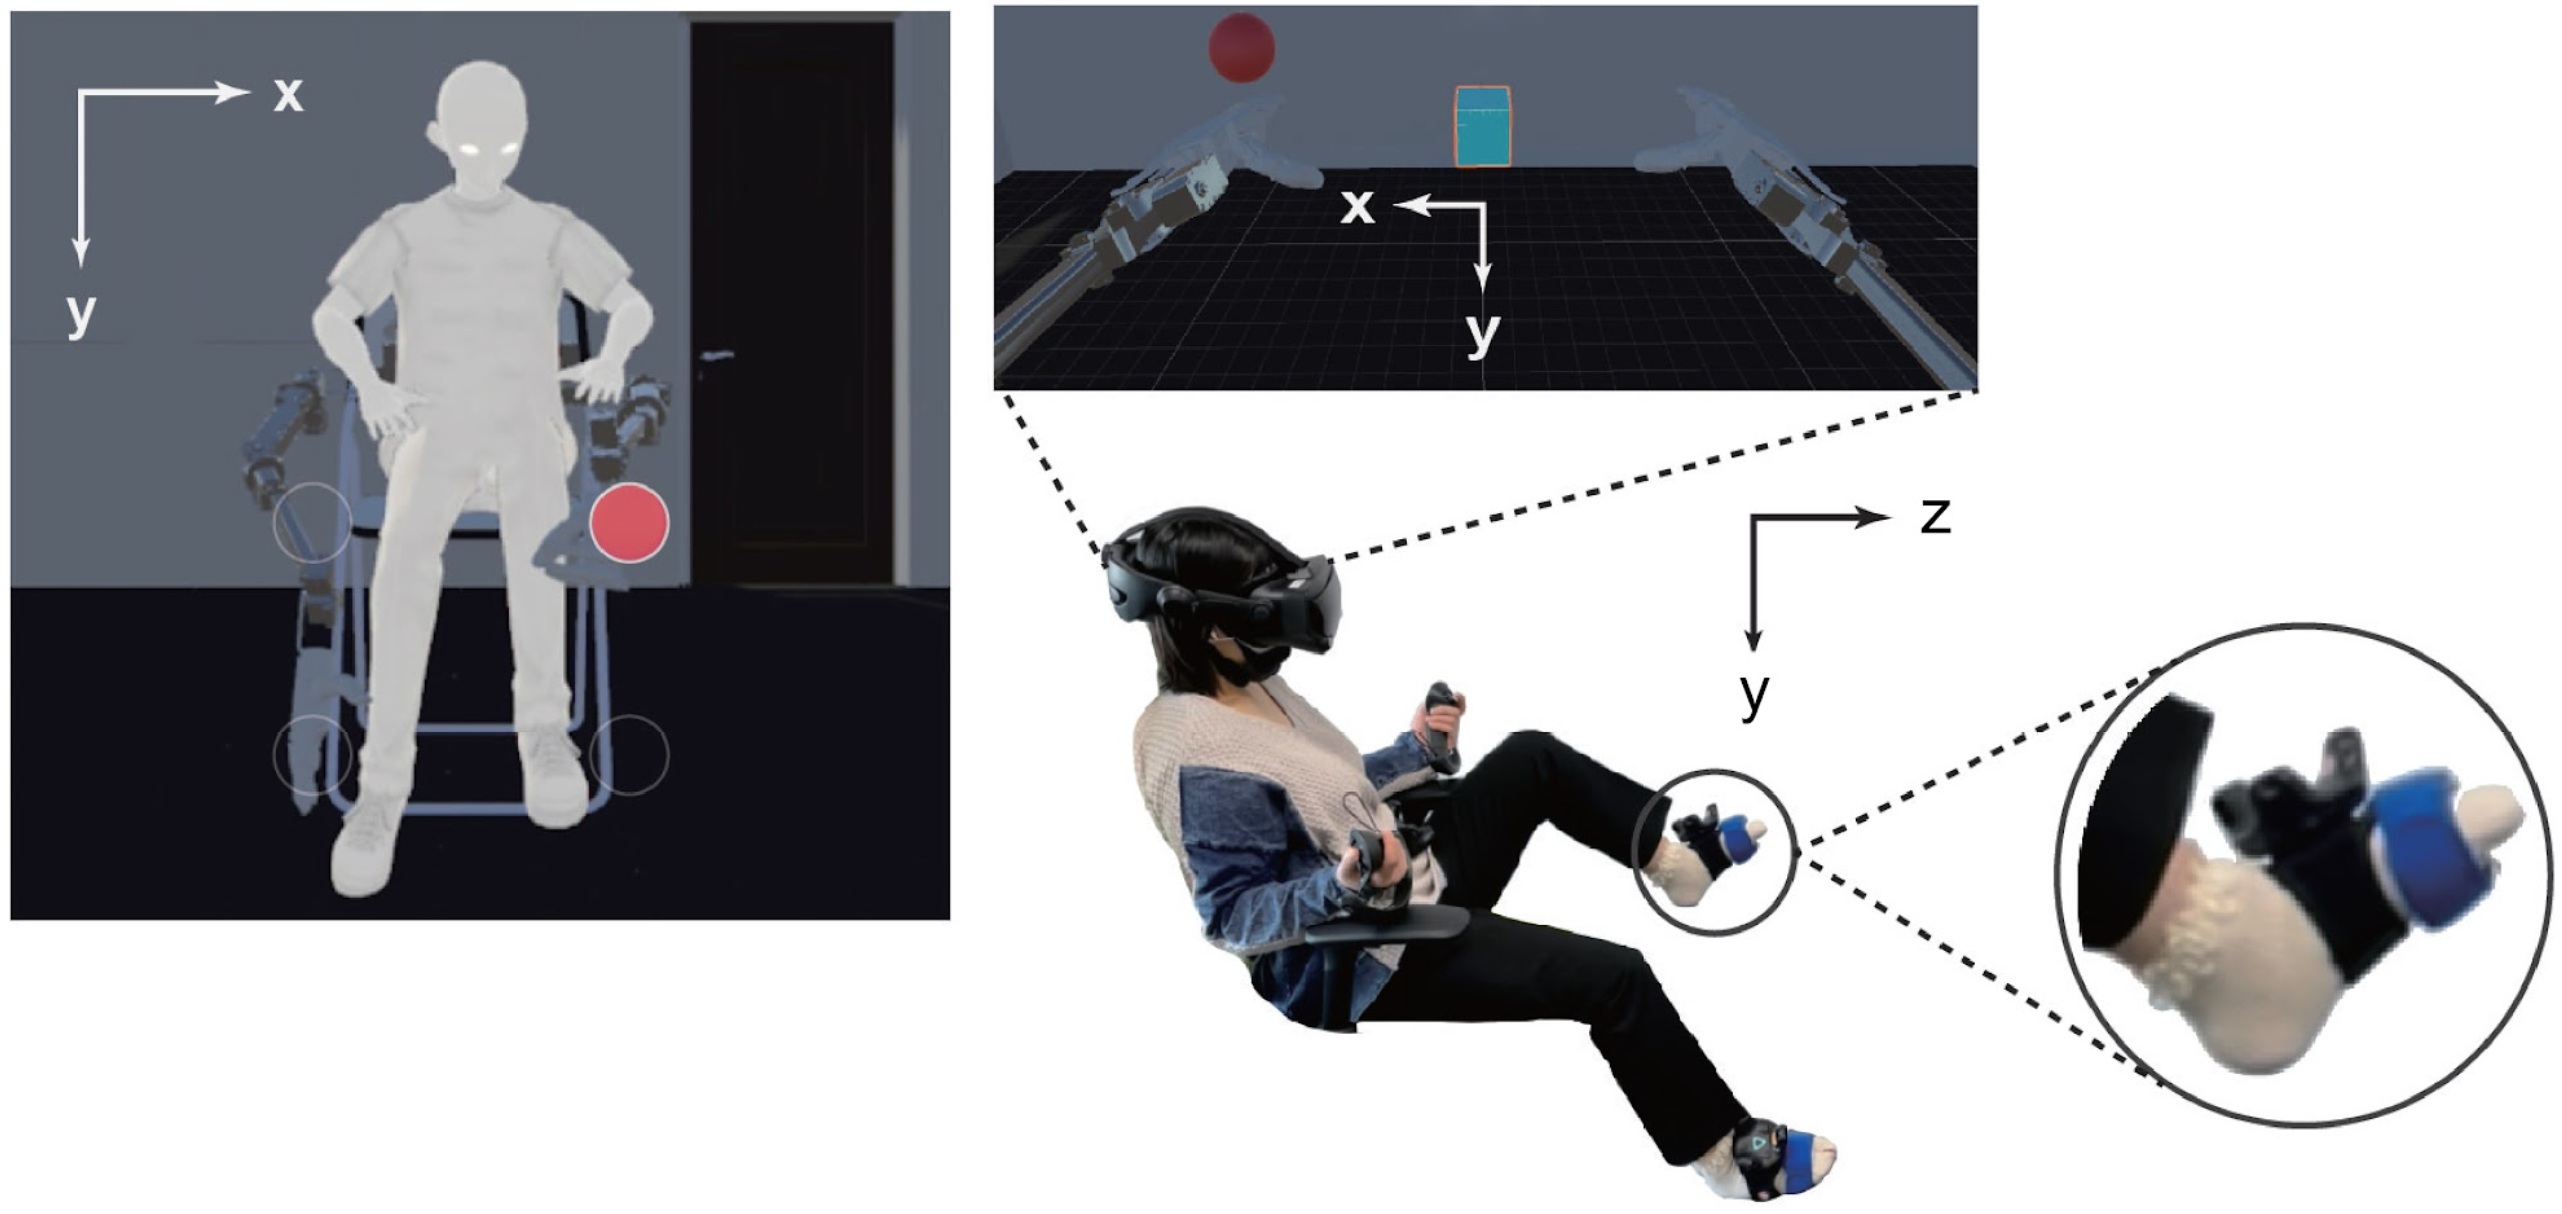 Images of a participant carrying out the 'ball-touch' task, corresponding between VR image and real life action.